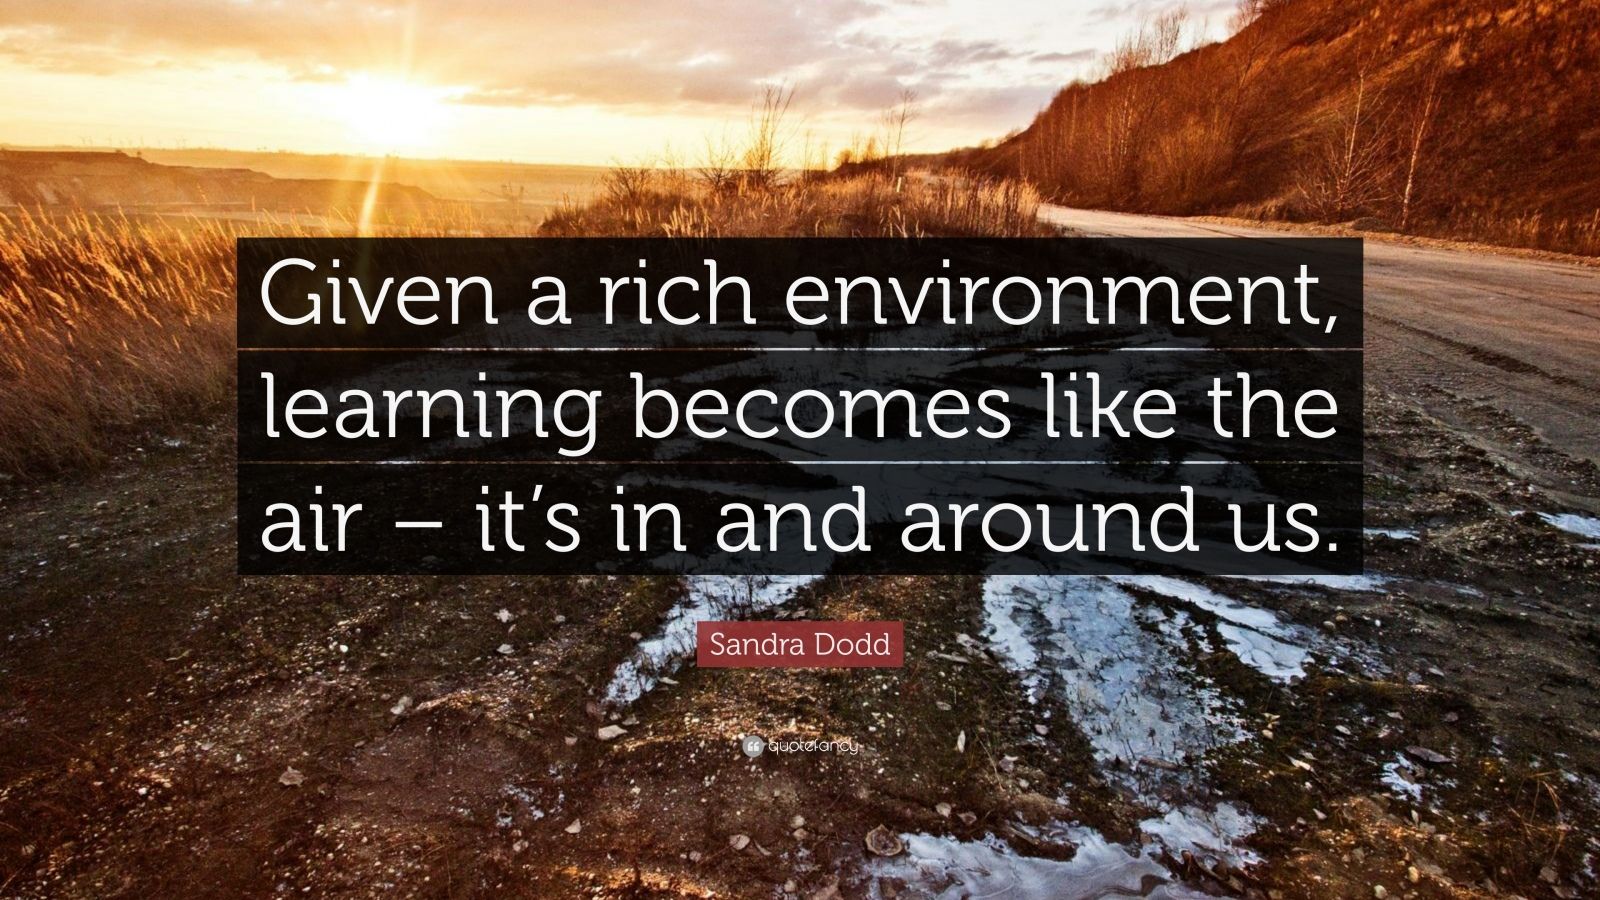 Sandra Dodd Quote: “Given a rich environment, learning becomes like the